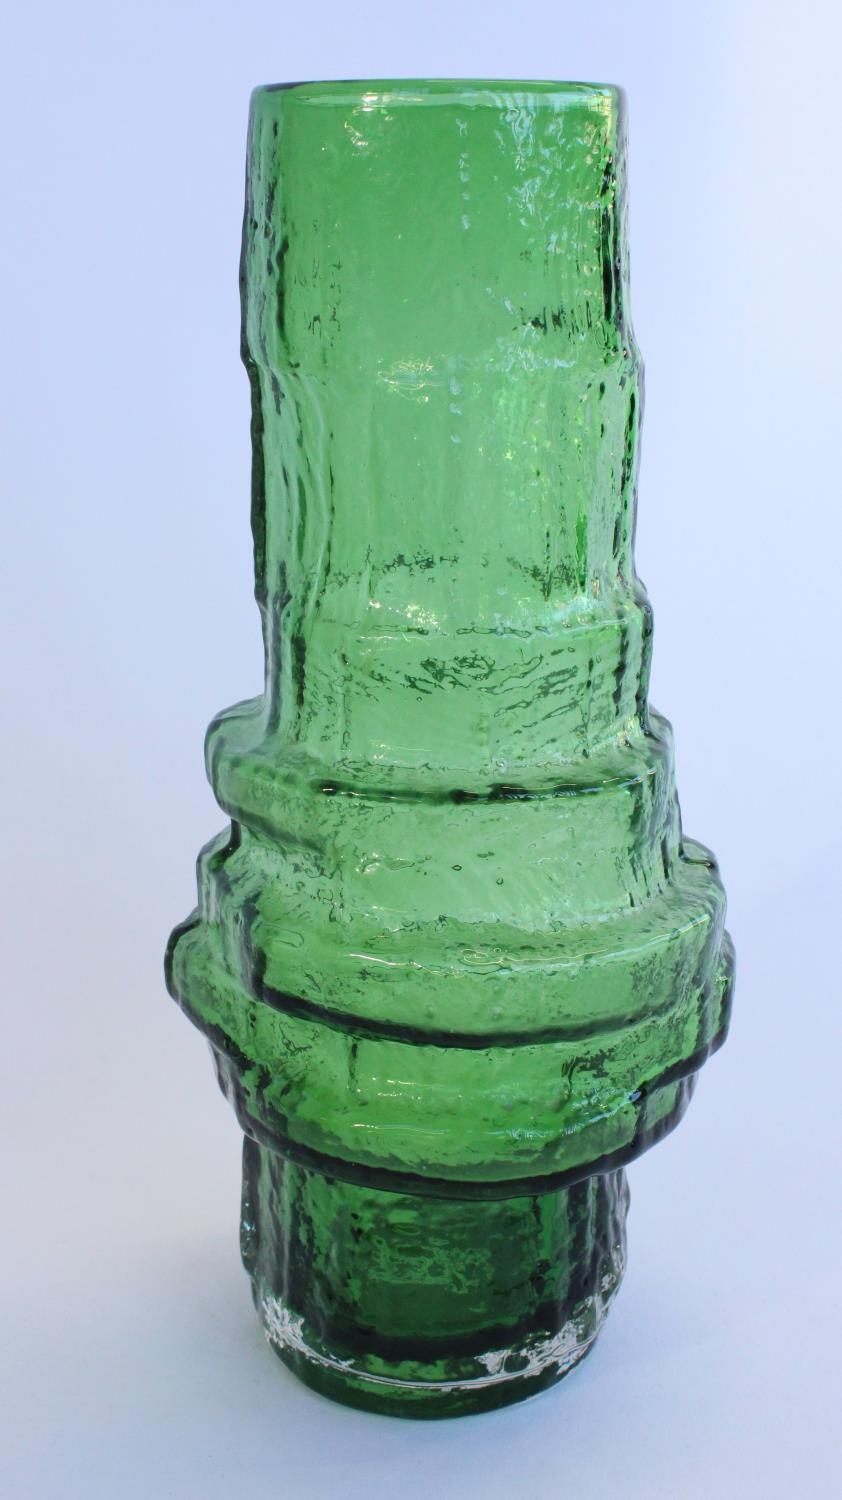 Whitefriars 'Hooped' 9680 textured glass vase in meadow green colourway as designed by Geoffrey